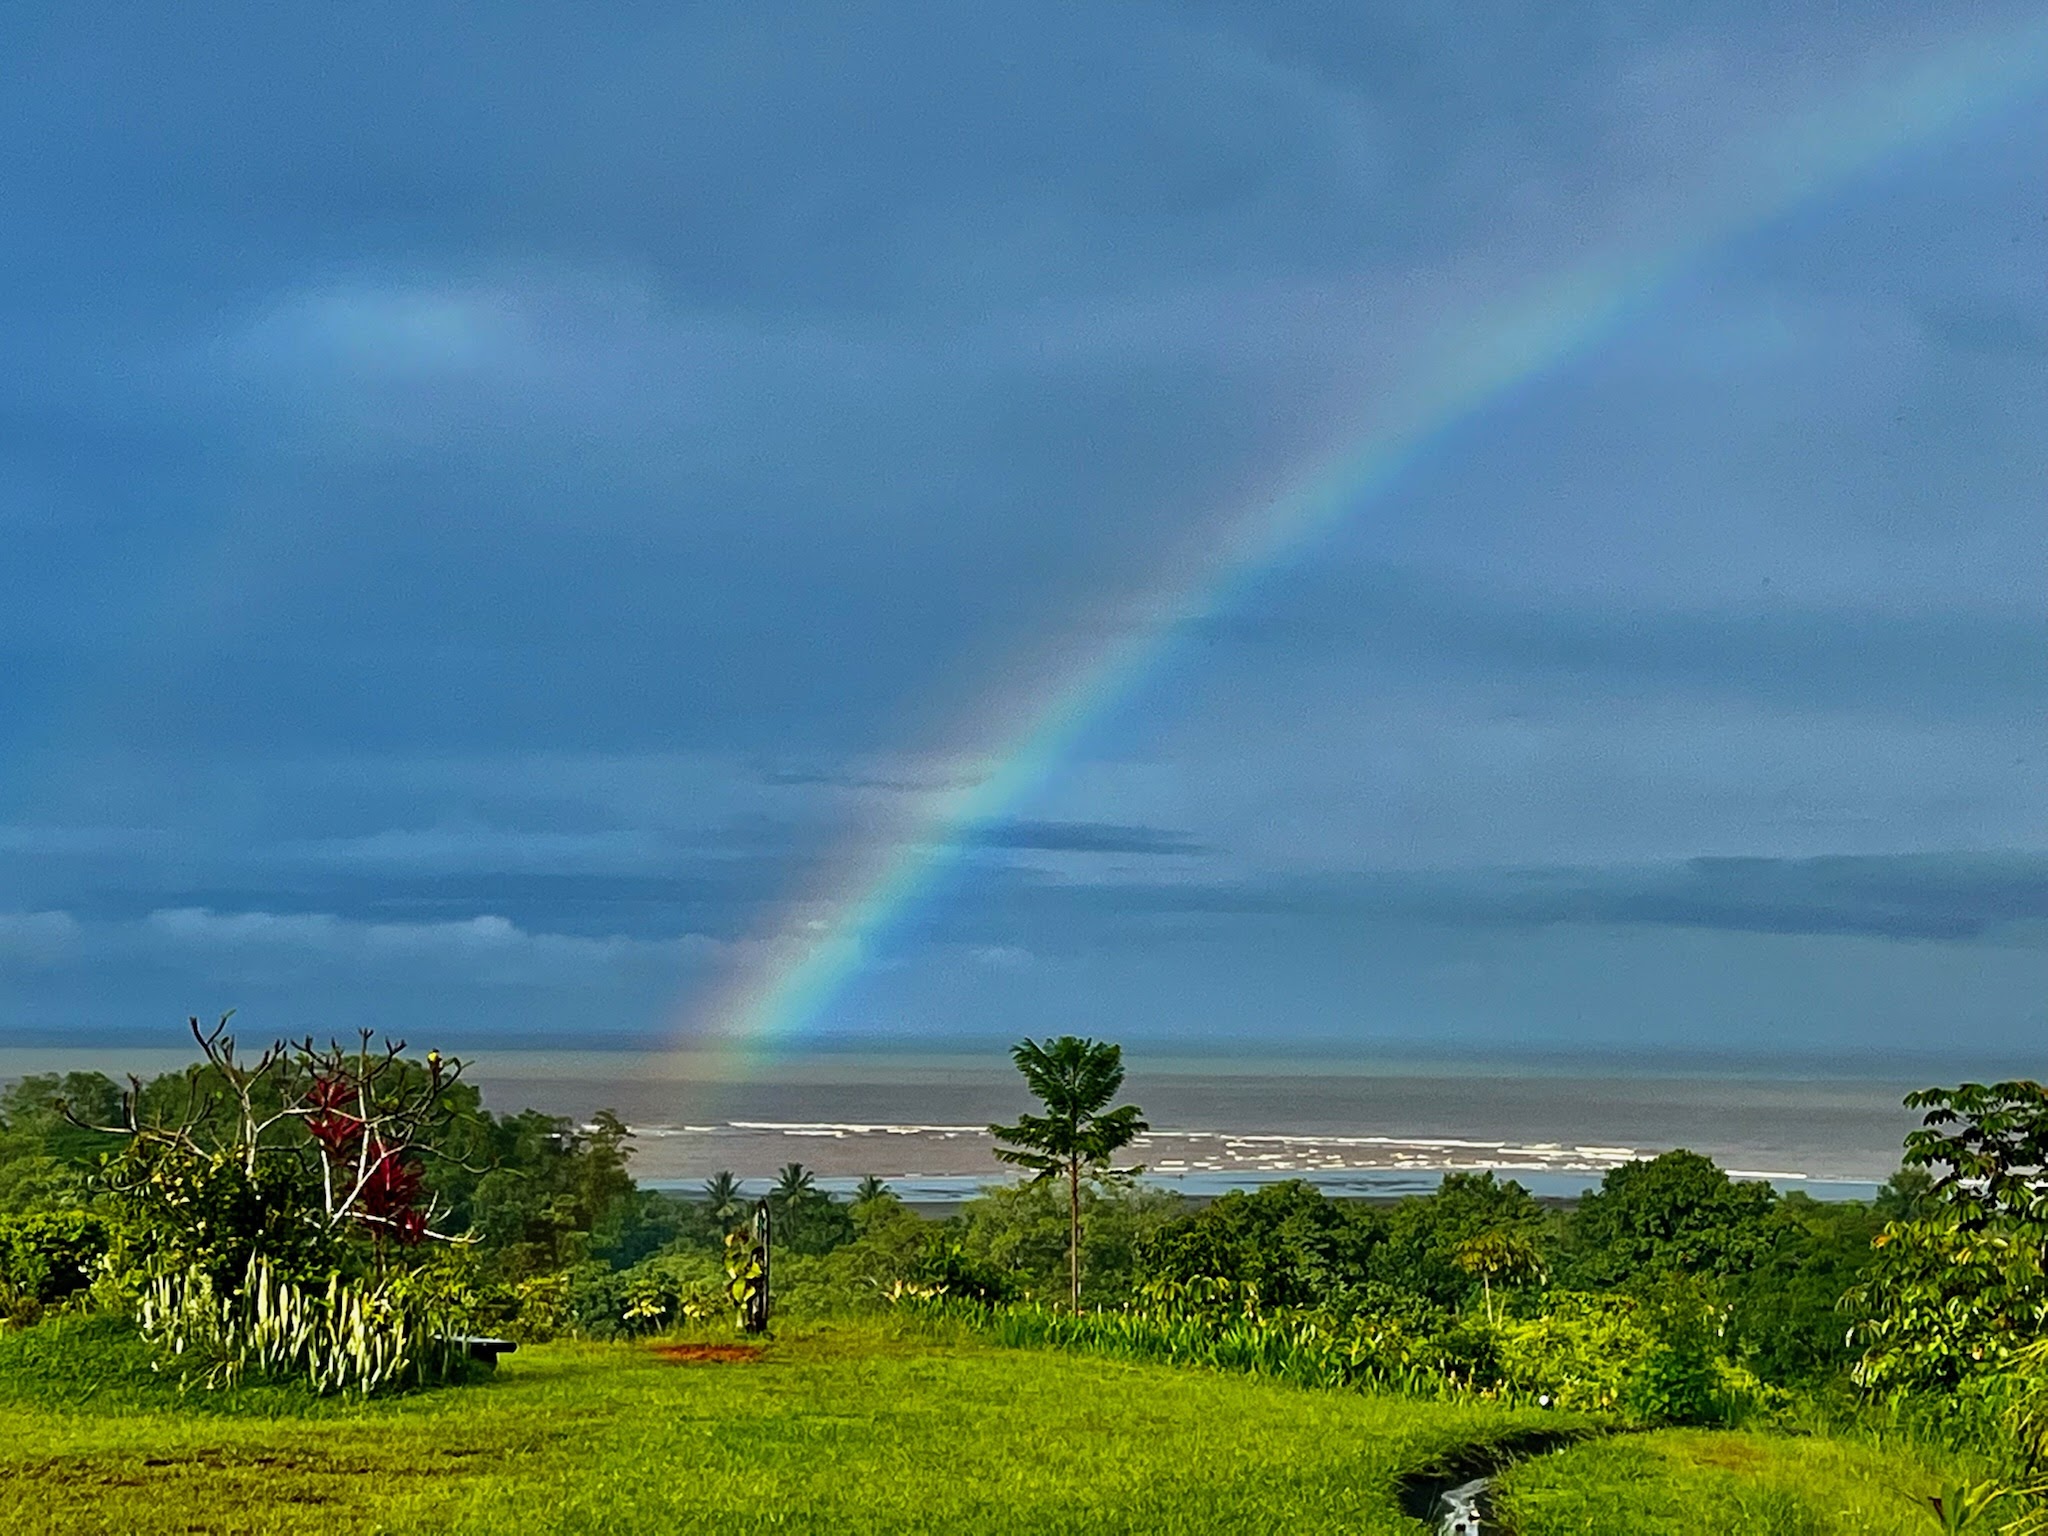 7 Things Tourists Should Take Care of When Visiting Costa Rica